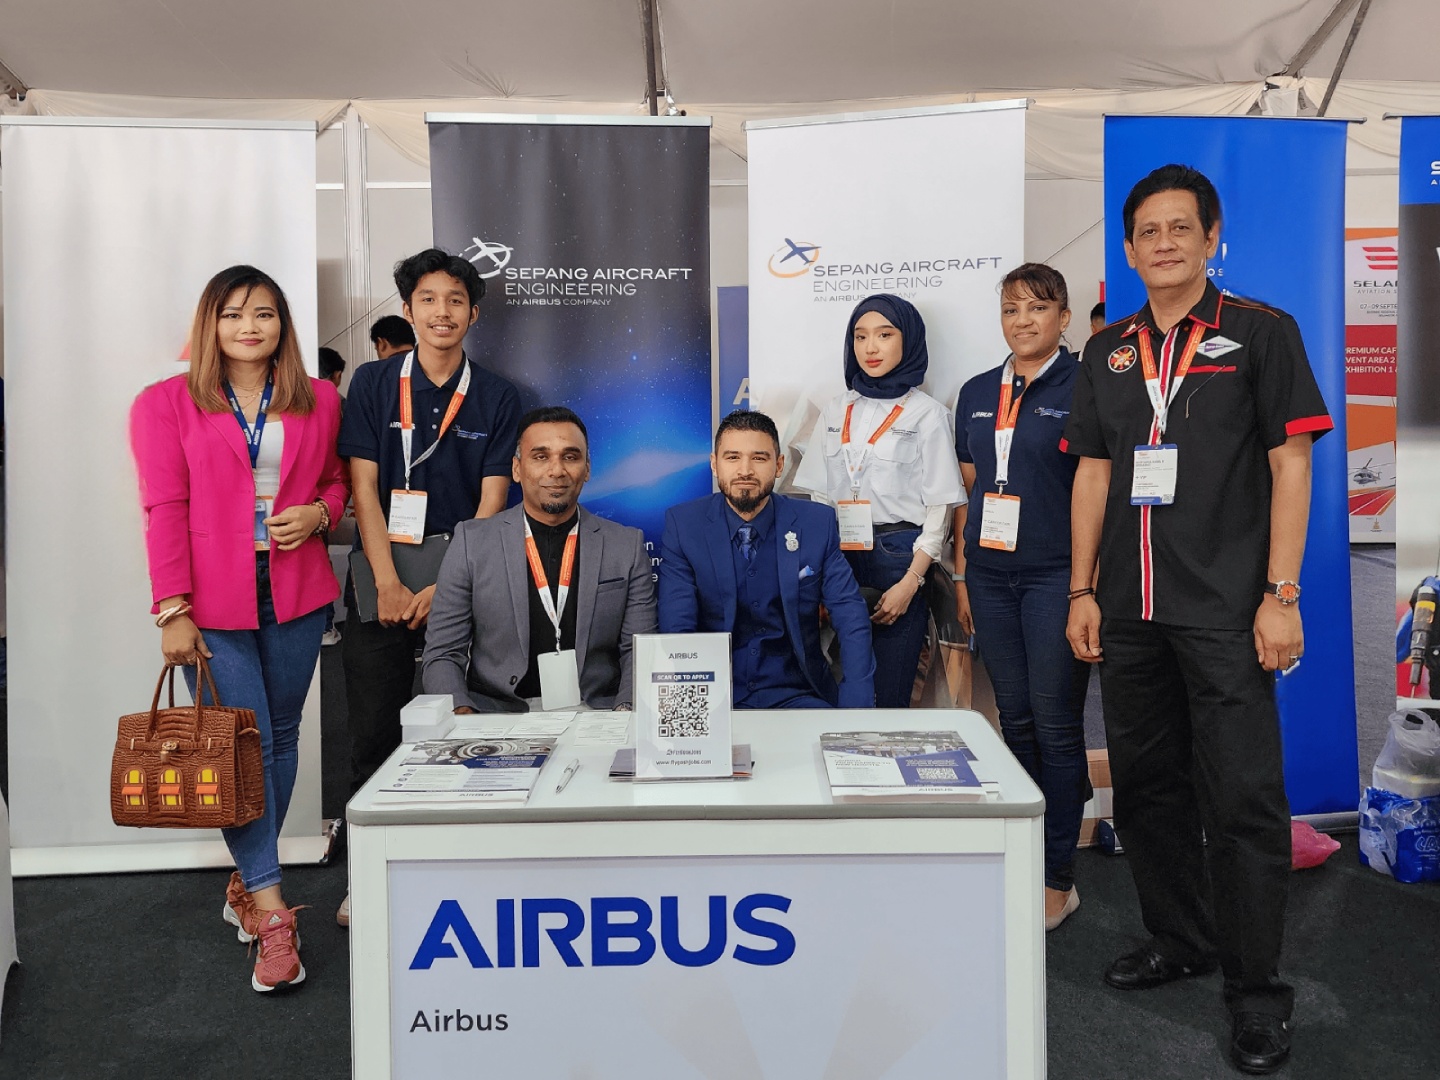 SAE is truly honoured to welcome Yang Mulia Tengku Shariffuddin Shah bin Tengku Sulaiman Shah Al-Haj to our booth and to meet our exceptional team.